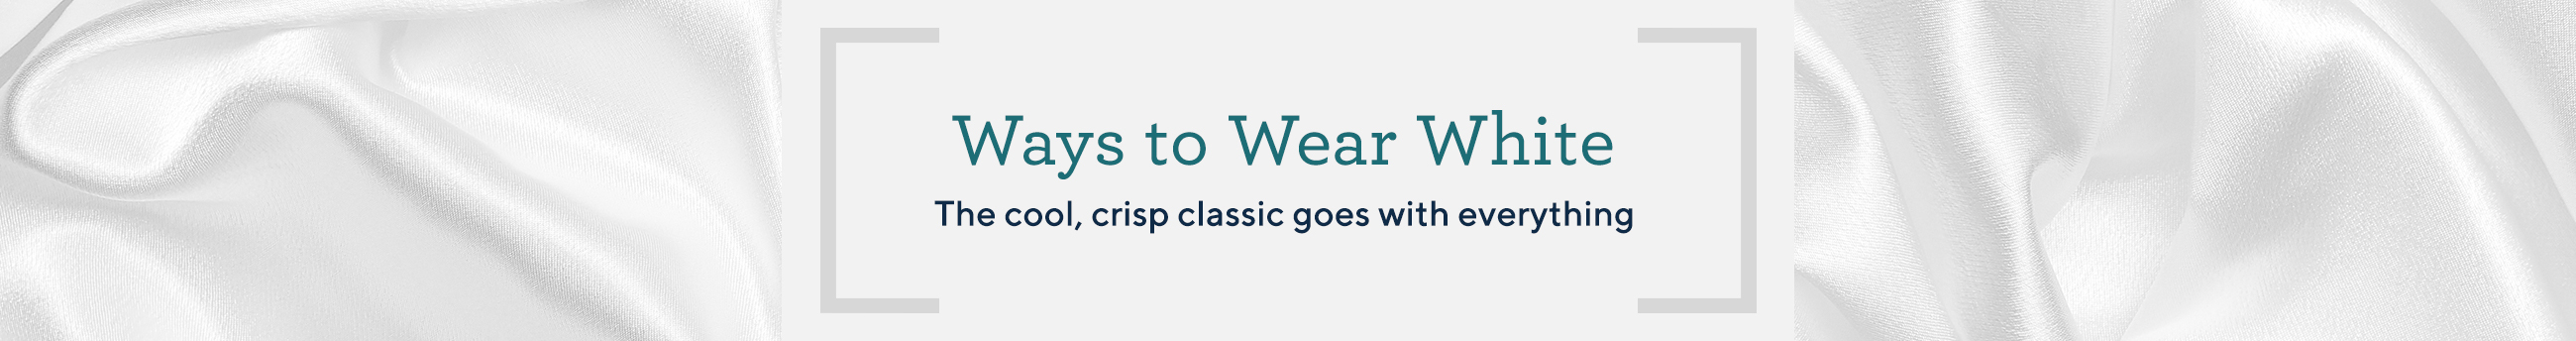 Ways to Wear White  The cool, crisp classic goes with everything